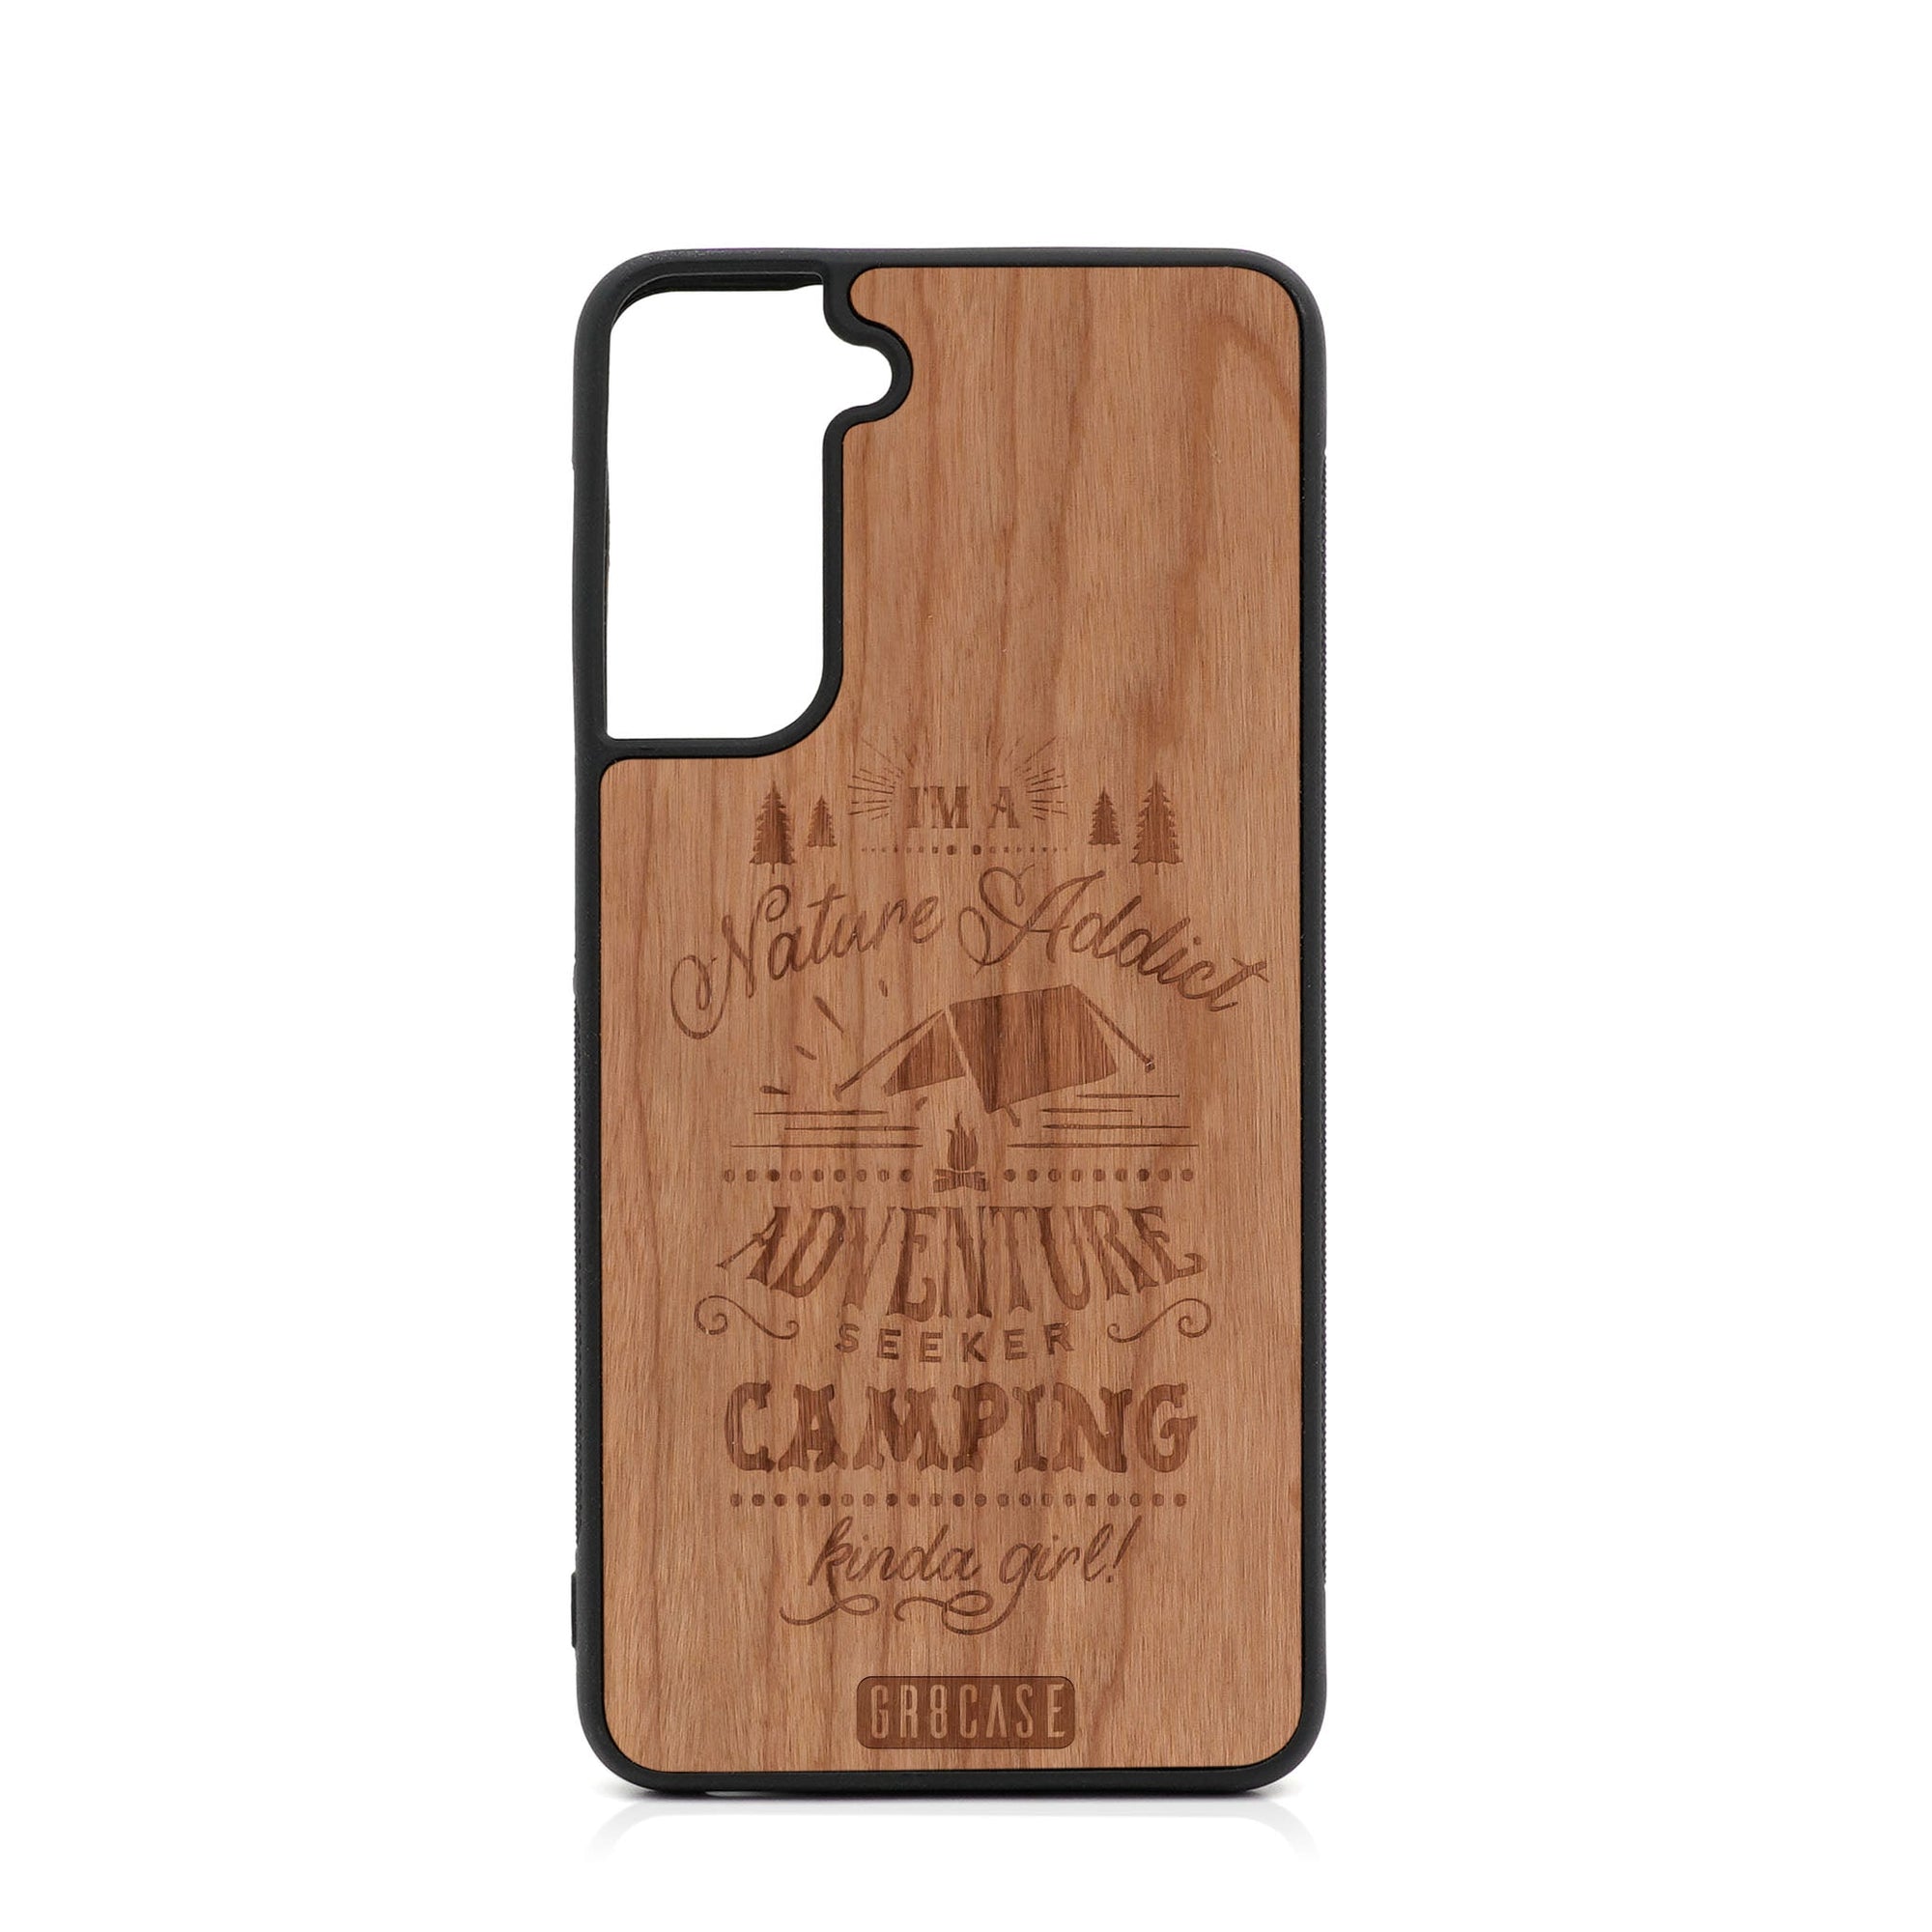 I'm A Nature Addict Adventure Seeker Camping Kinda Girl Design Wood Case For Samsung Galaxy S23 5G